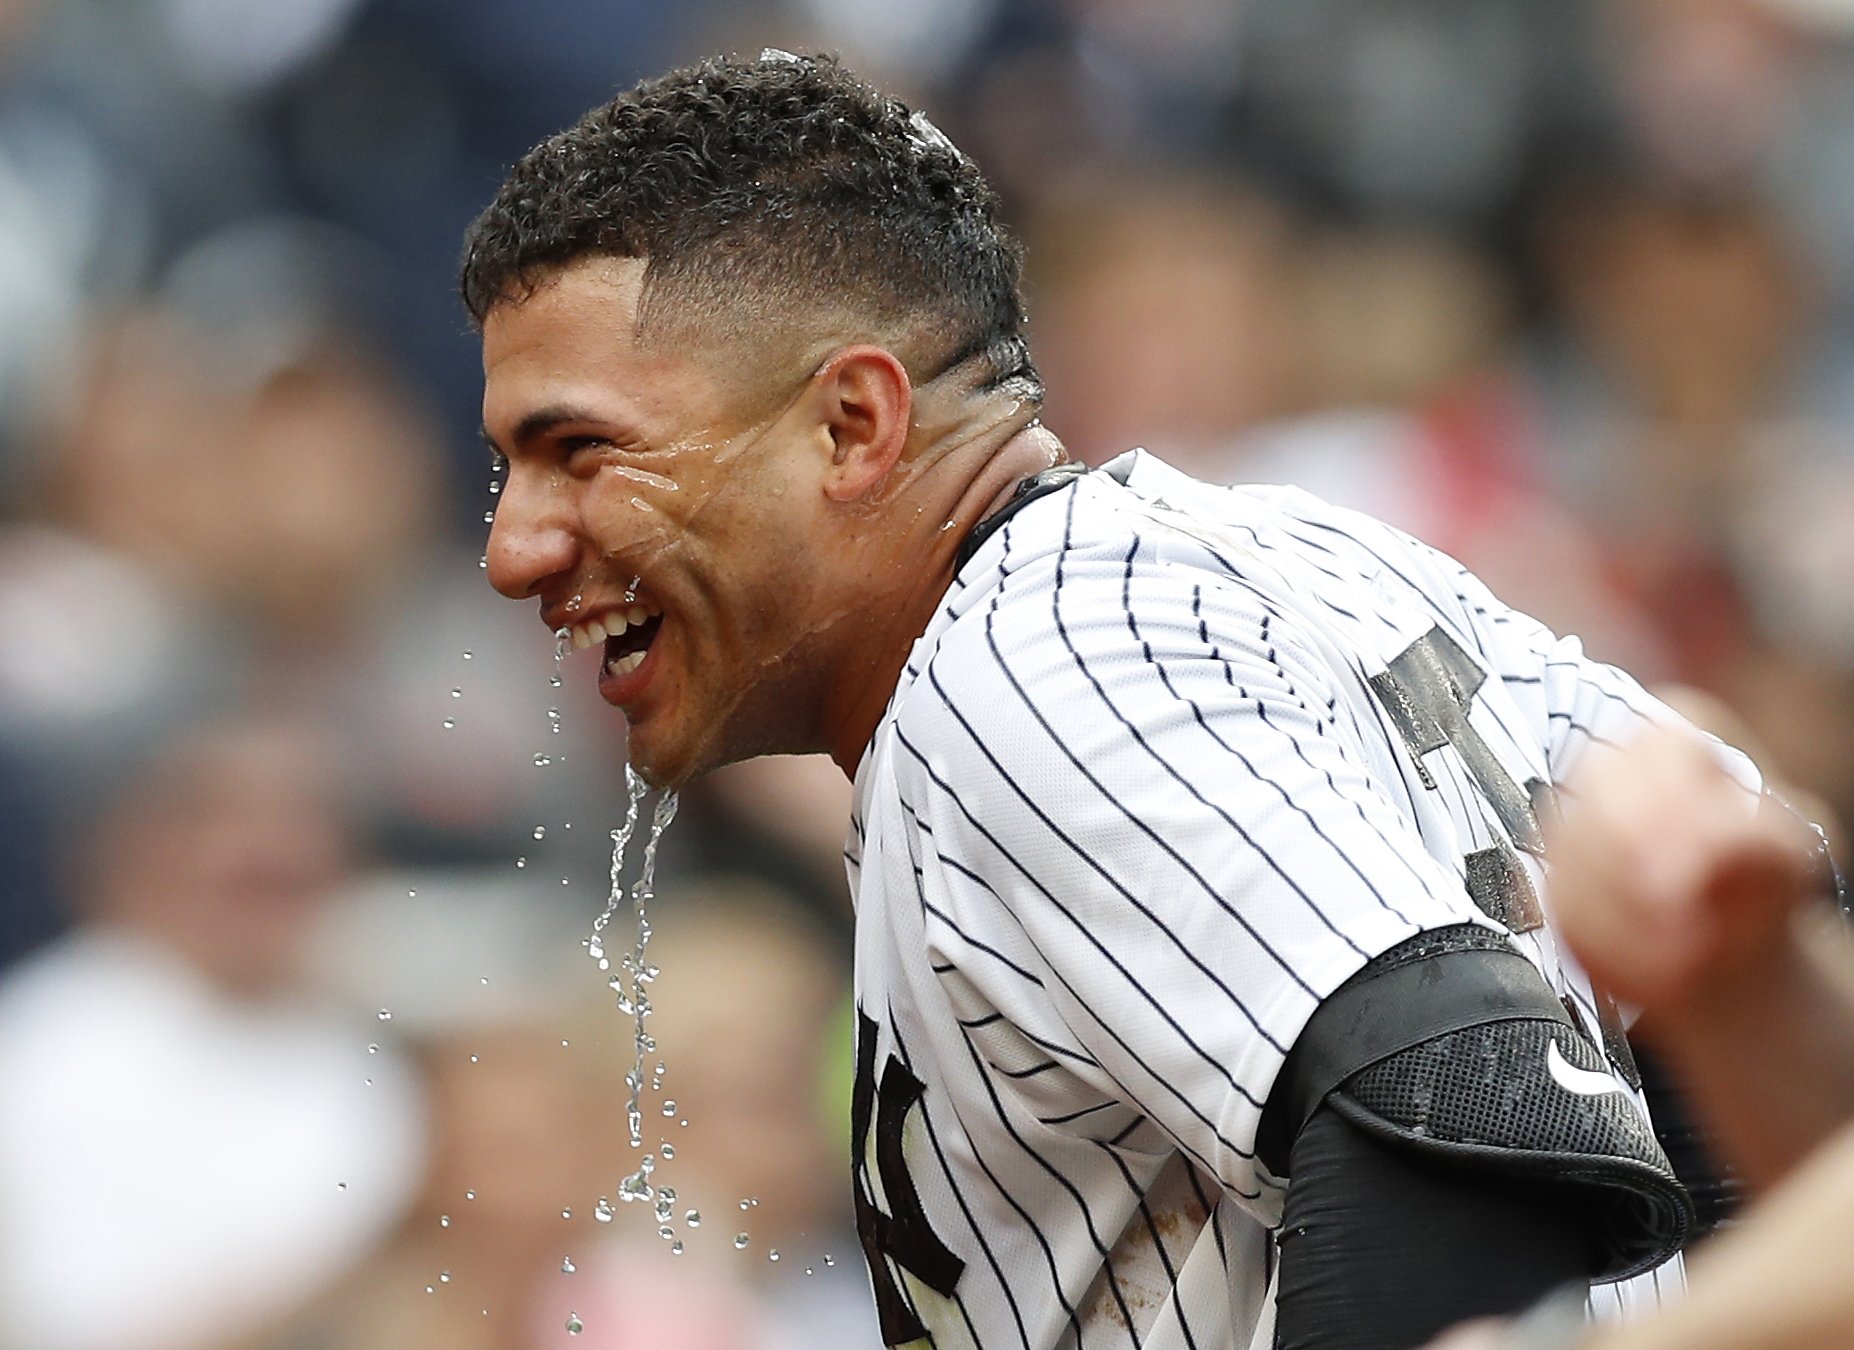 Gleyber Torres becomes youngest Yankee to hit a walk-off HR in win over  Indians